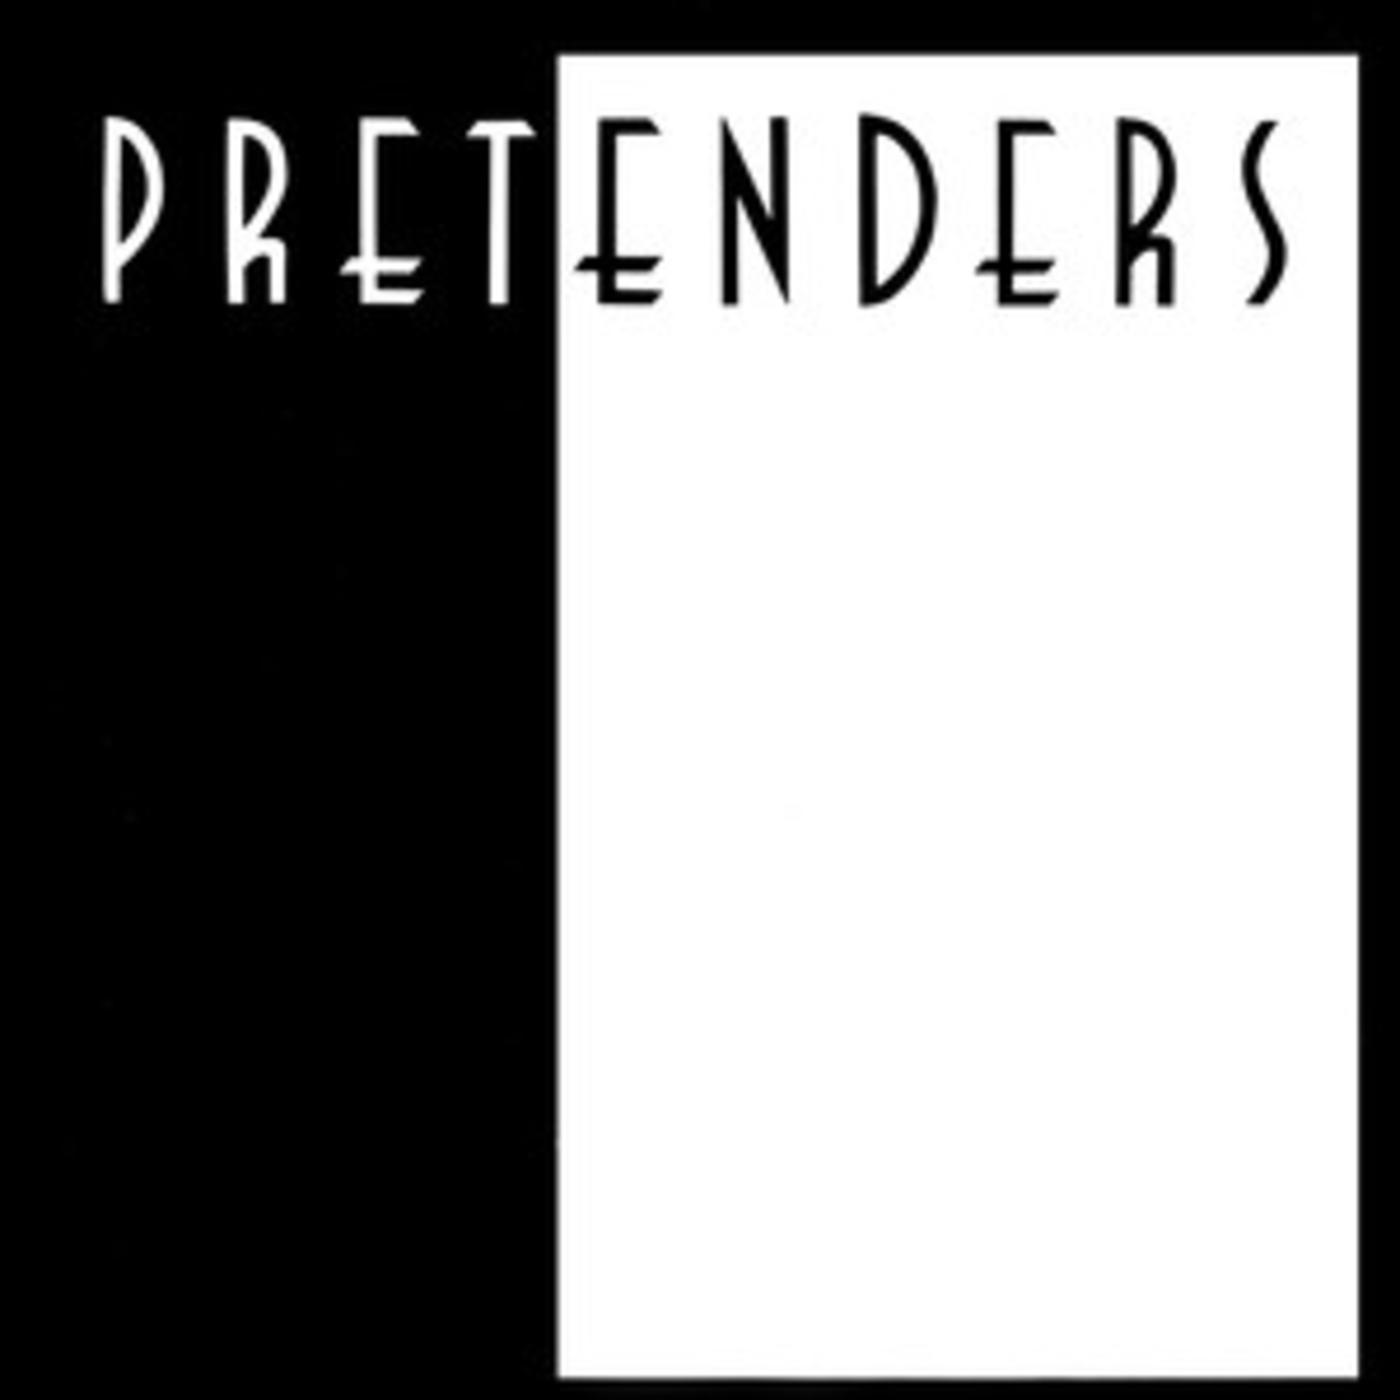 Pretenders - Official Playlist - Brass In Pocket, Don't Get Me Wrong, Back on the Chain Gang & more